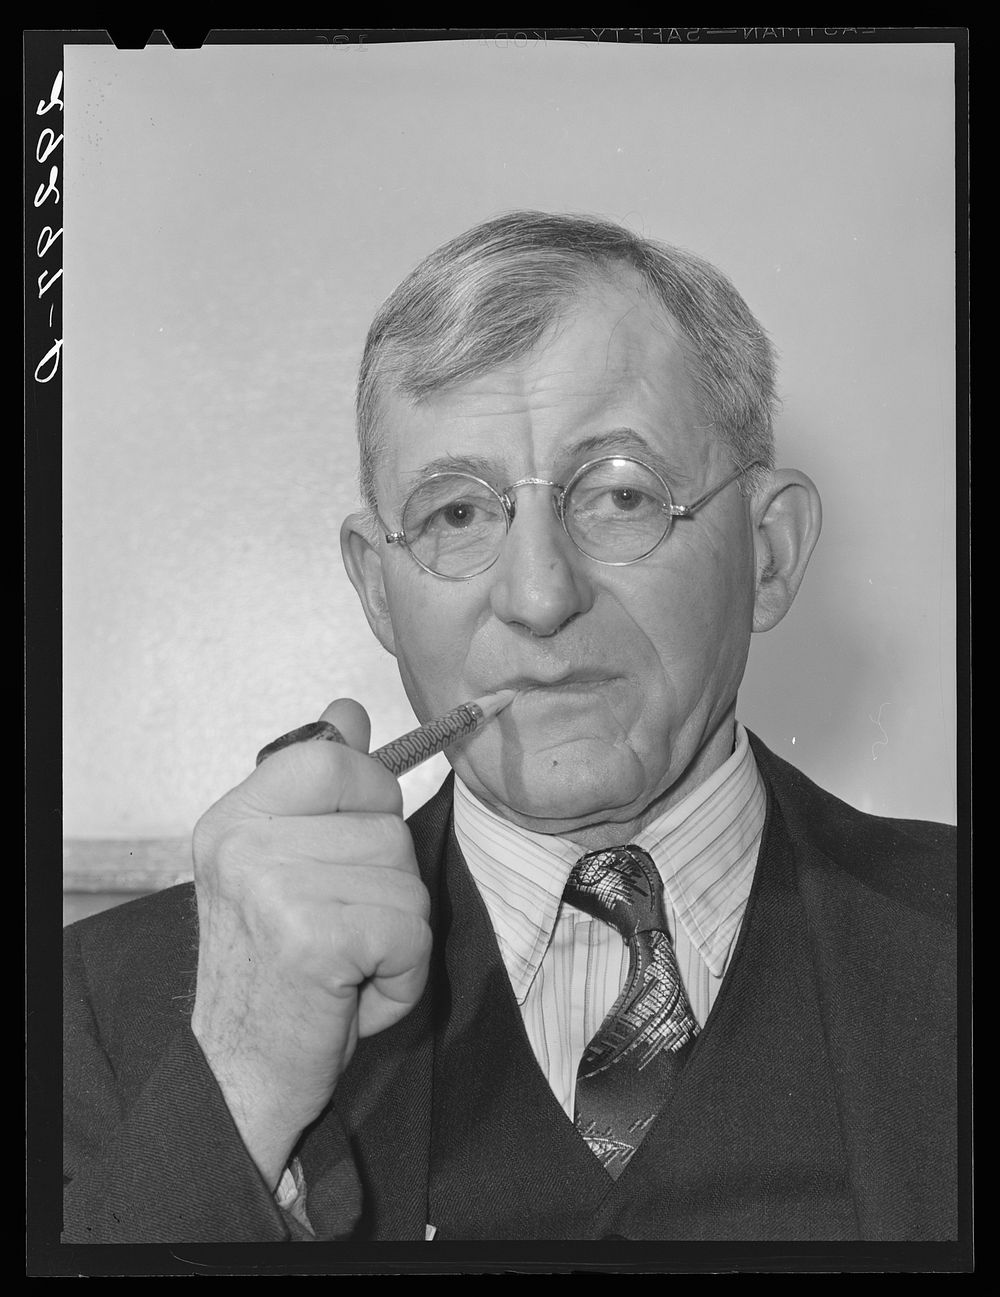 Member of county agricultural council. Ross County, Ohio. Sourced from the Library of Congress.